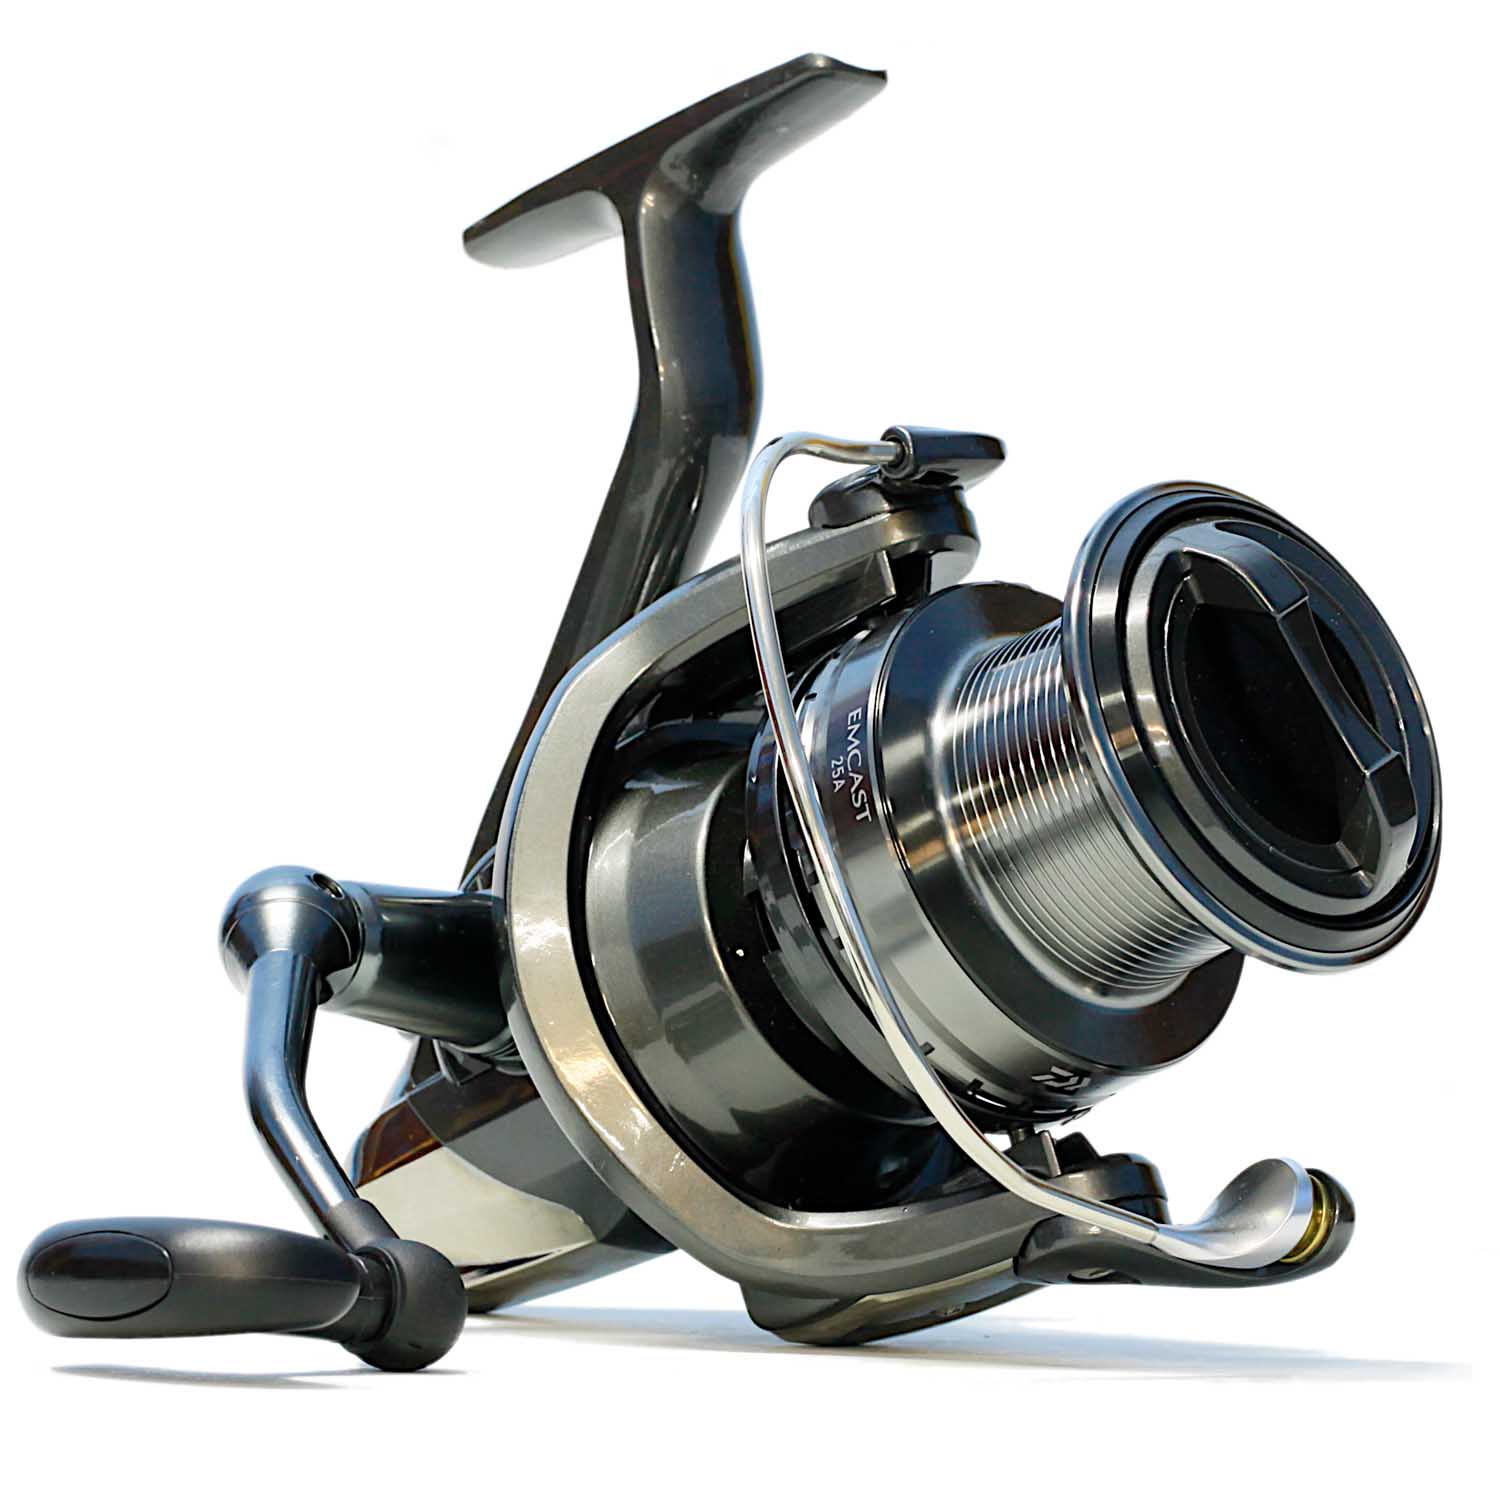 Daiwa Emcast A Spinning Reel Spare Spool Showspace